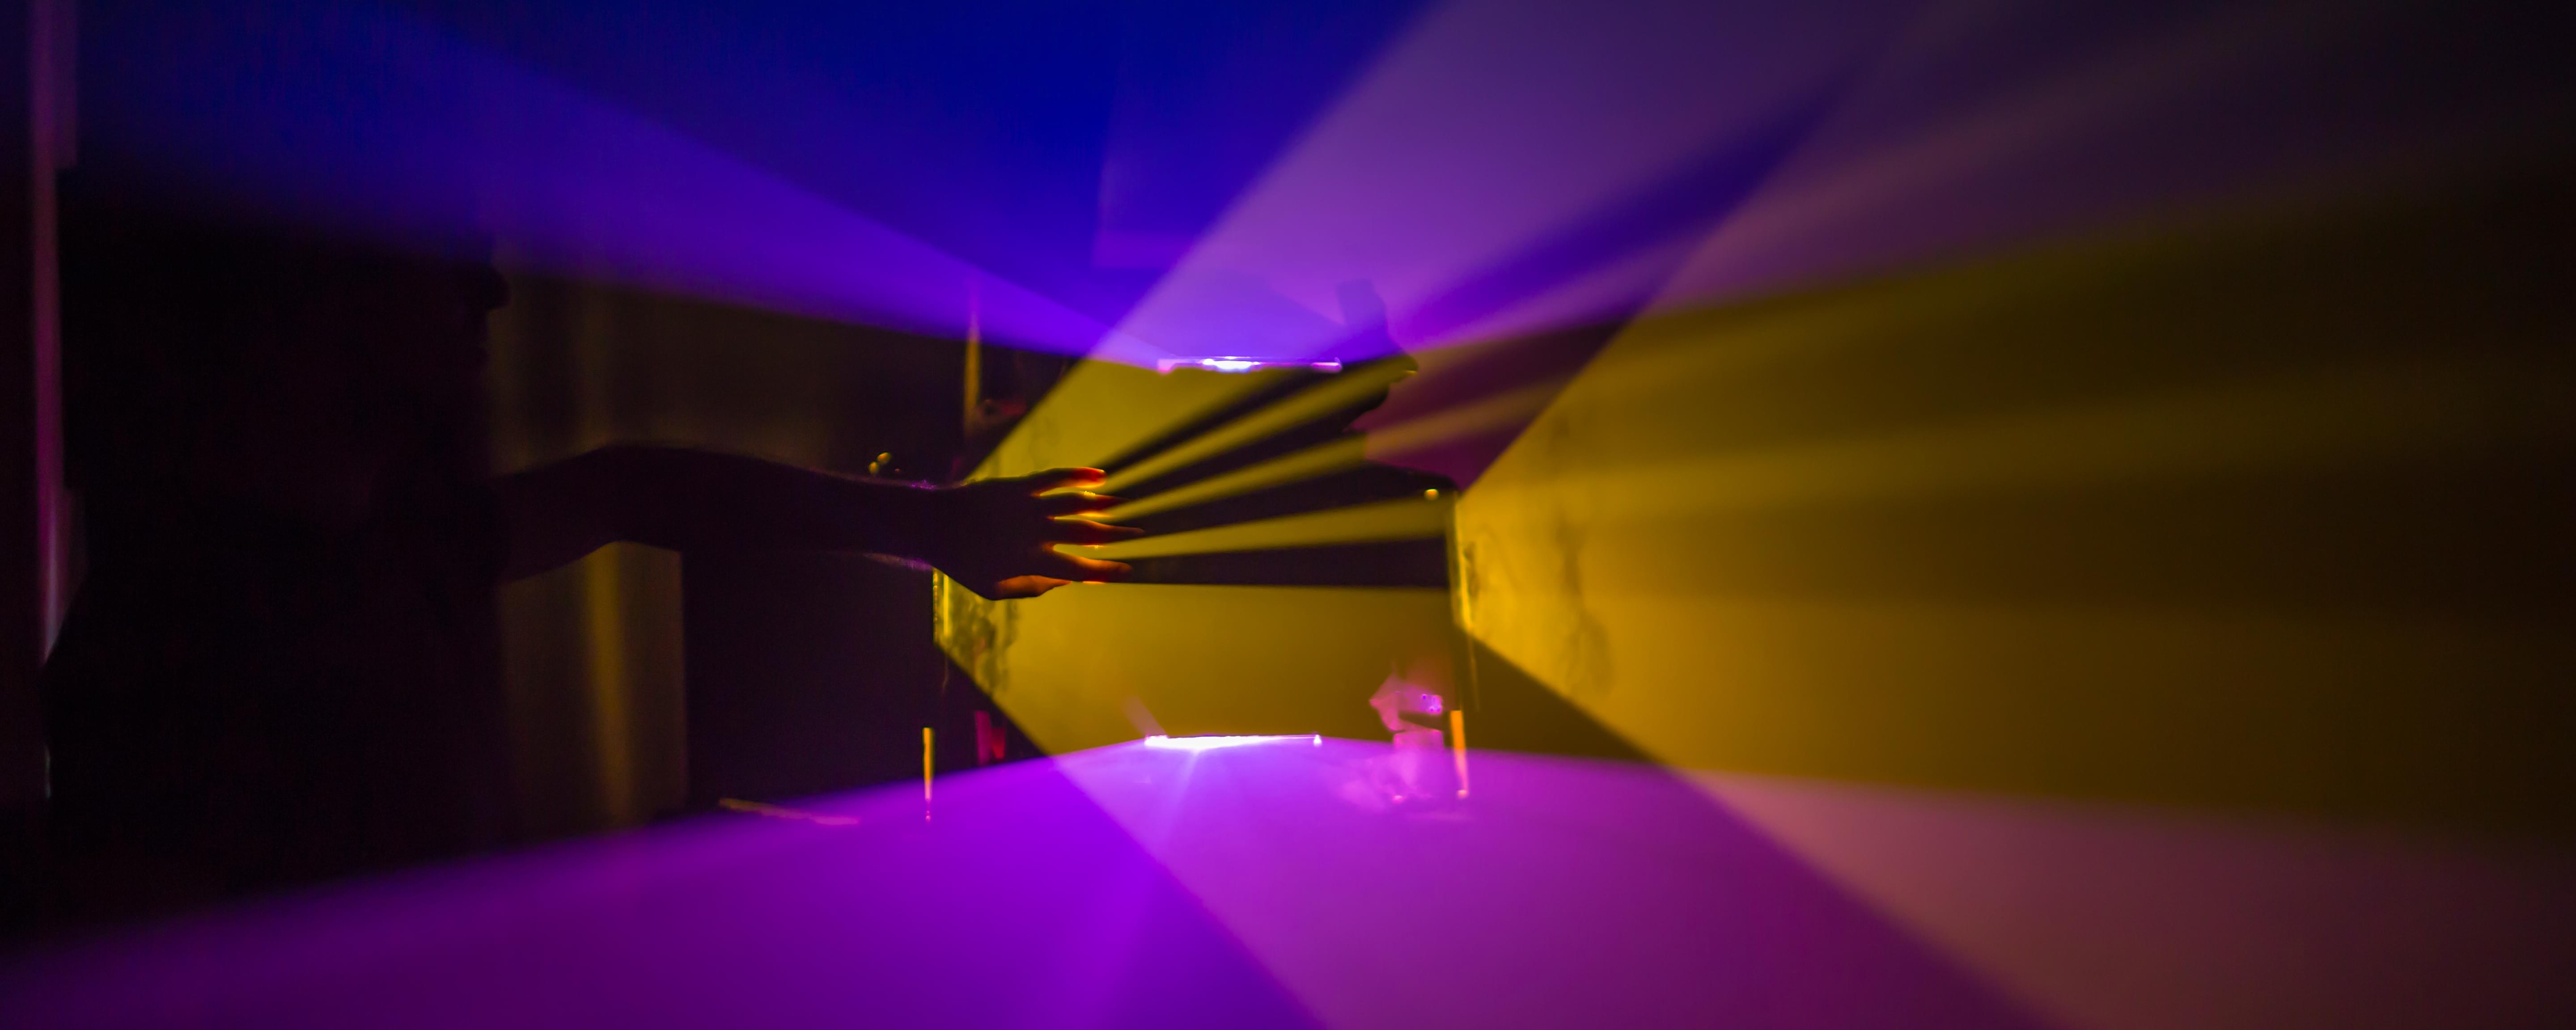 Photograph of dark room with planes of yellow and purple light emminating from projectors. A hand is in one of the planes creating a shadow lake of fingers.